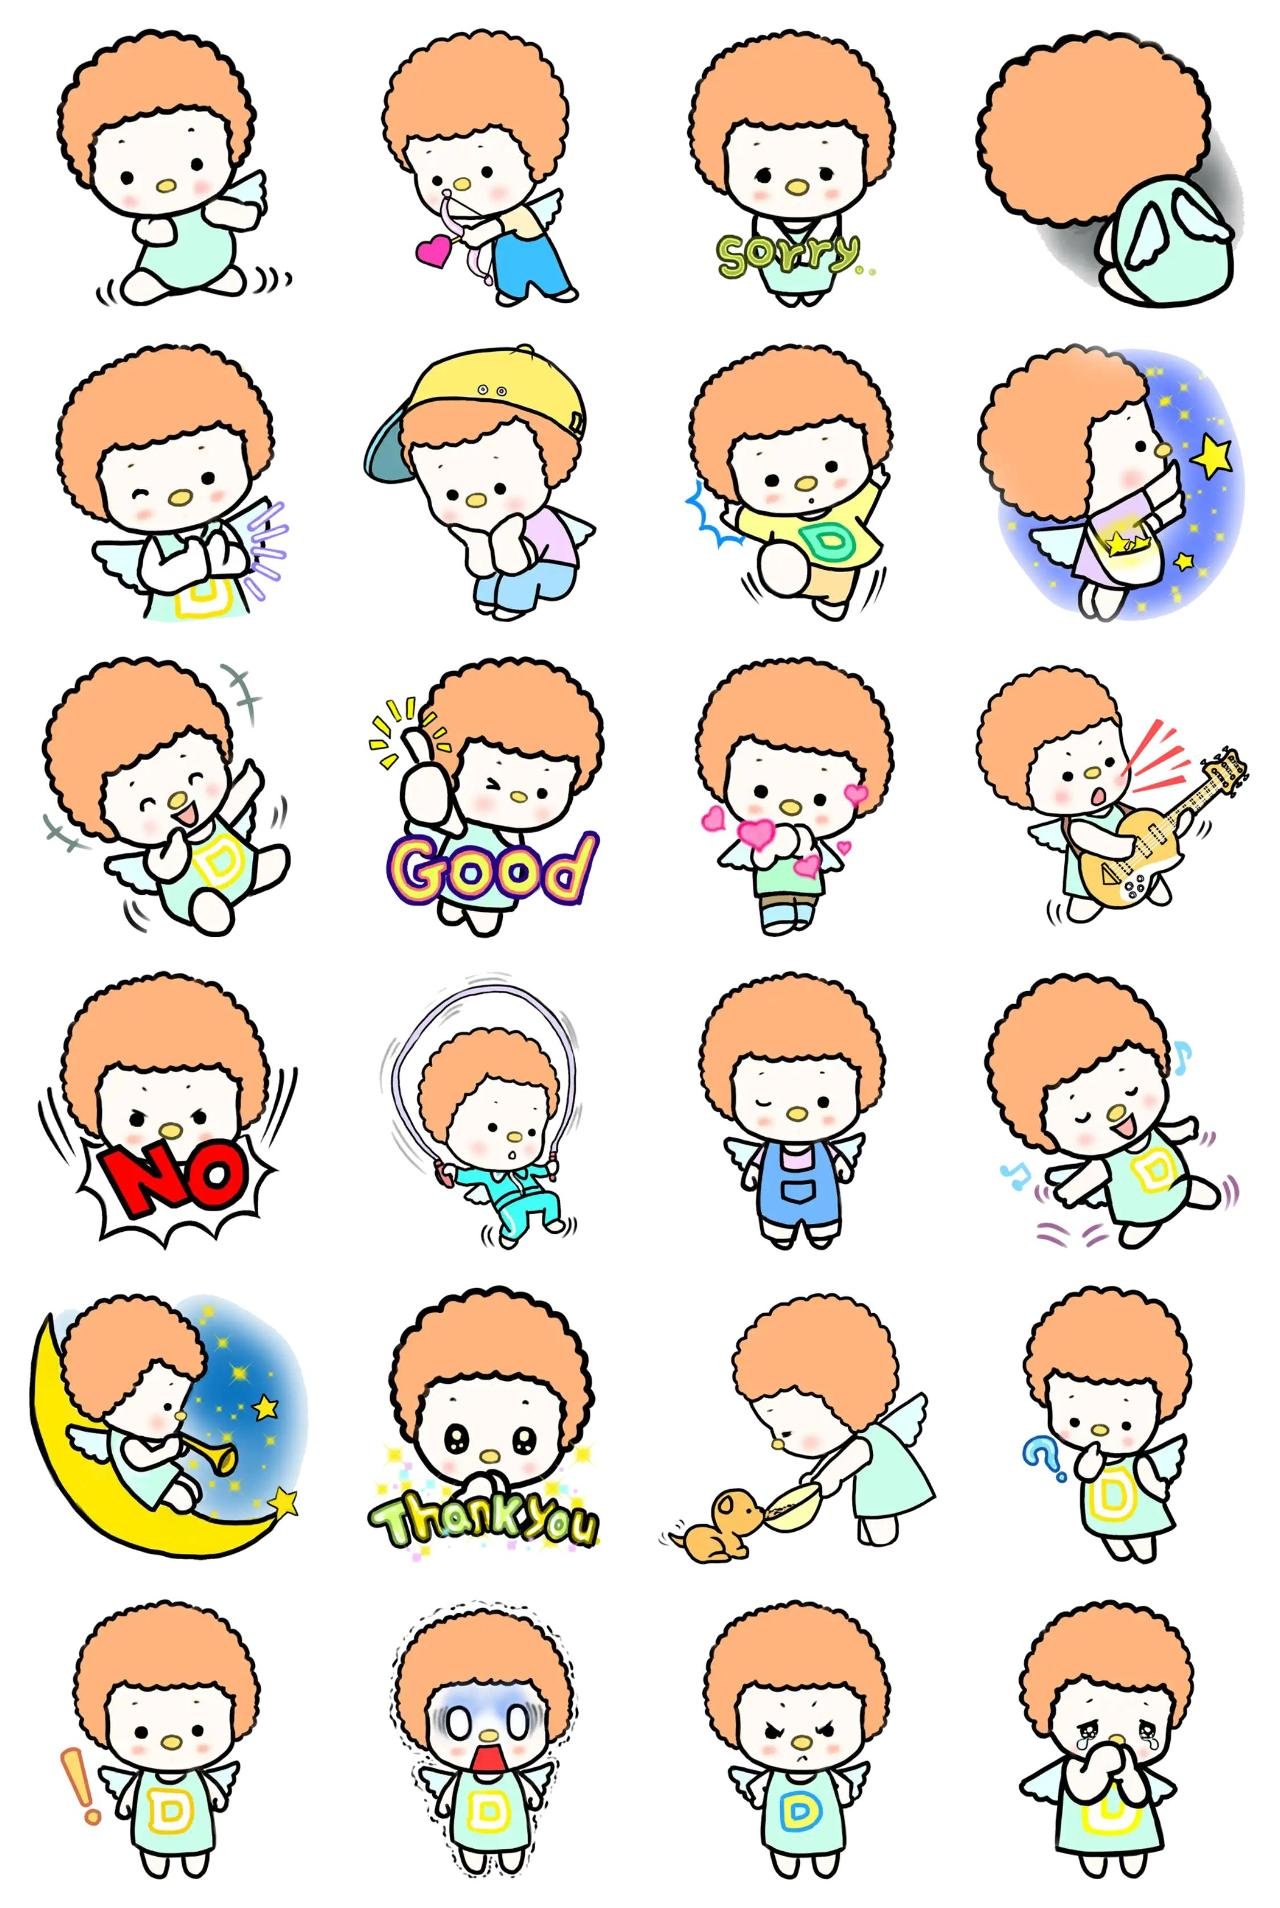 Baby angel Boonge People sticker pack for Whatsapp, Telegram, Signal, and others chatting and message apps